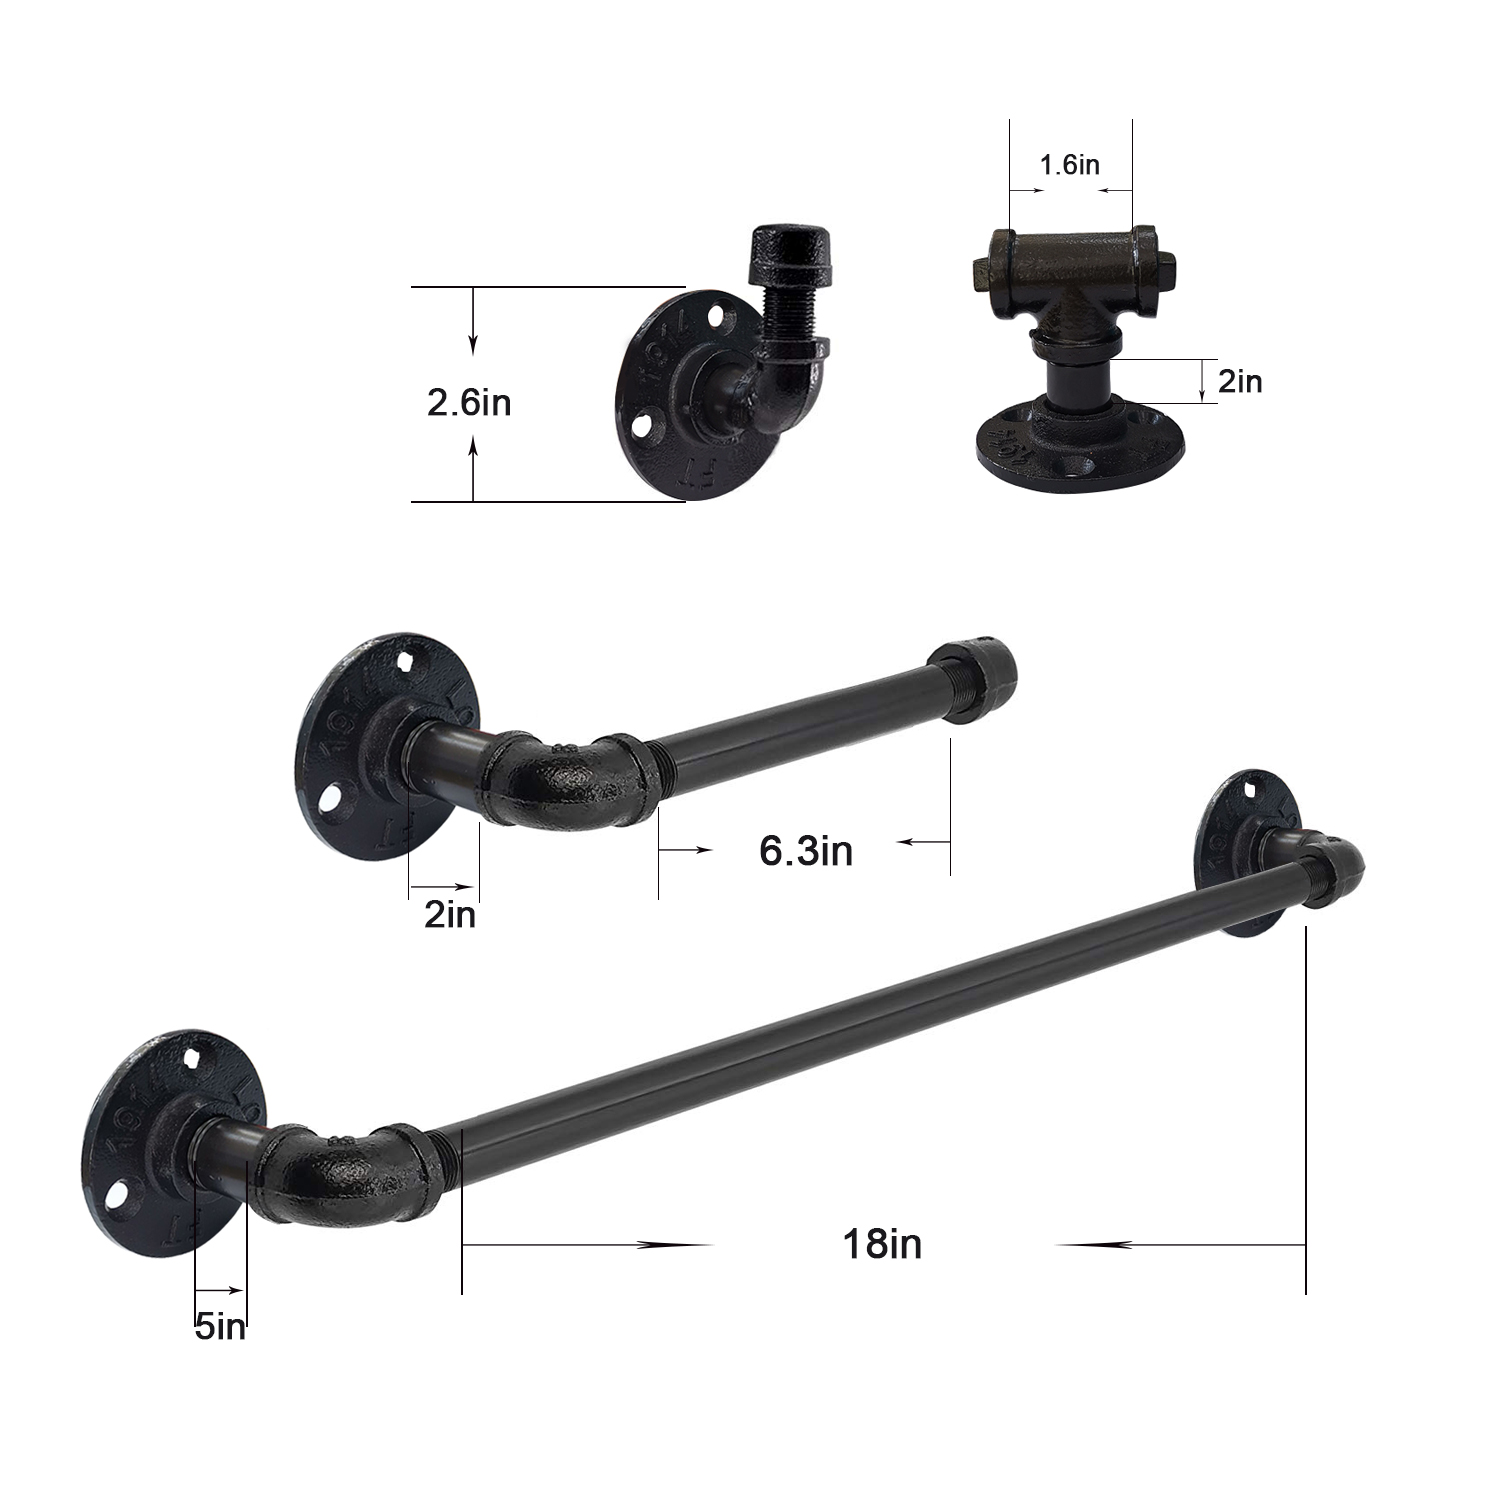 Industrial Pipe Bathroom Hardware Fixture Set by Pipe Decor | 4 Piece Kit Includes Robe Hooks, 18 Inch Towel Bar and Toilet Paper Holder, Heavy Duty DIY Style, Rustic and Chic Industrial Iron Pipe Electroplated Black Finish